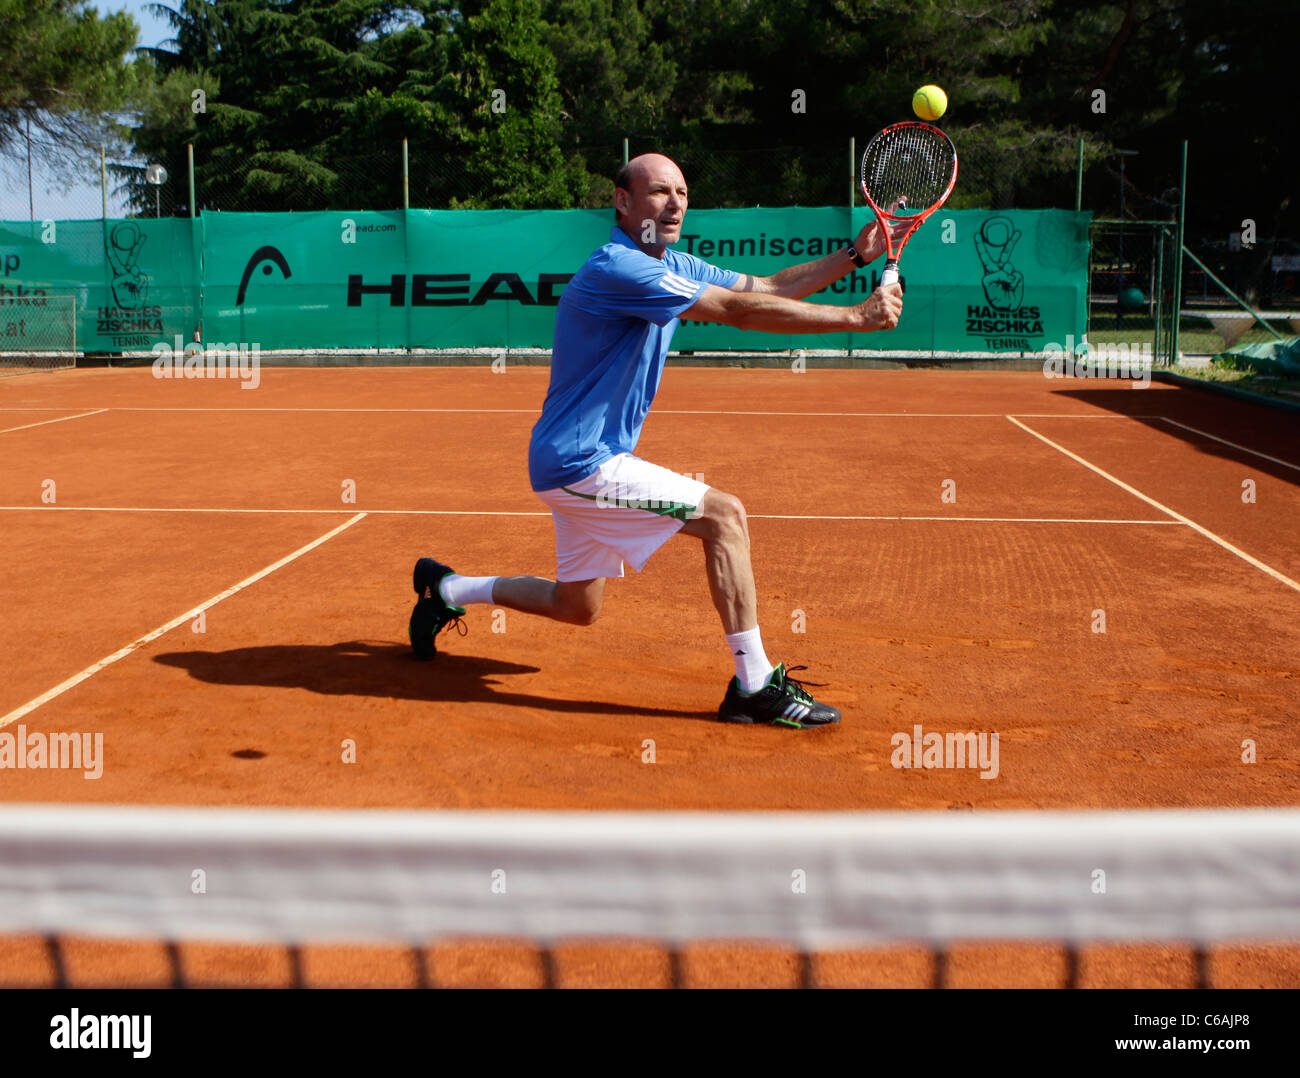 Tennis player in action at the net Stock Photo